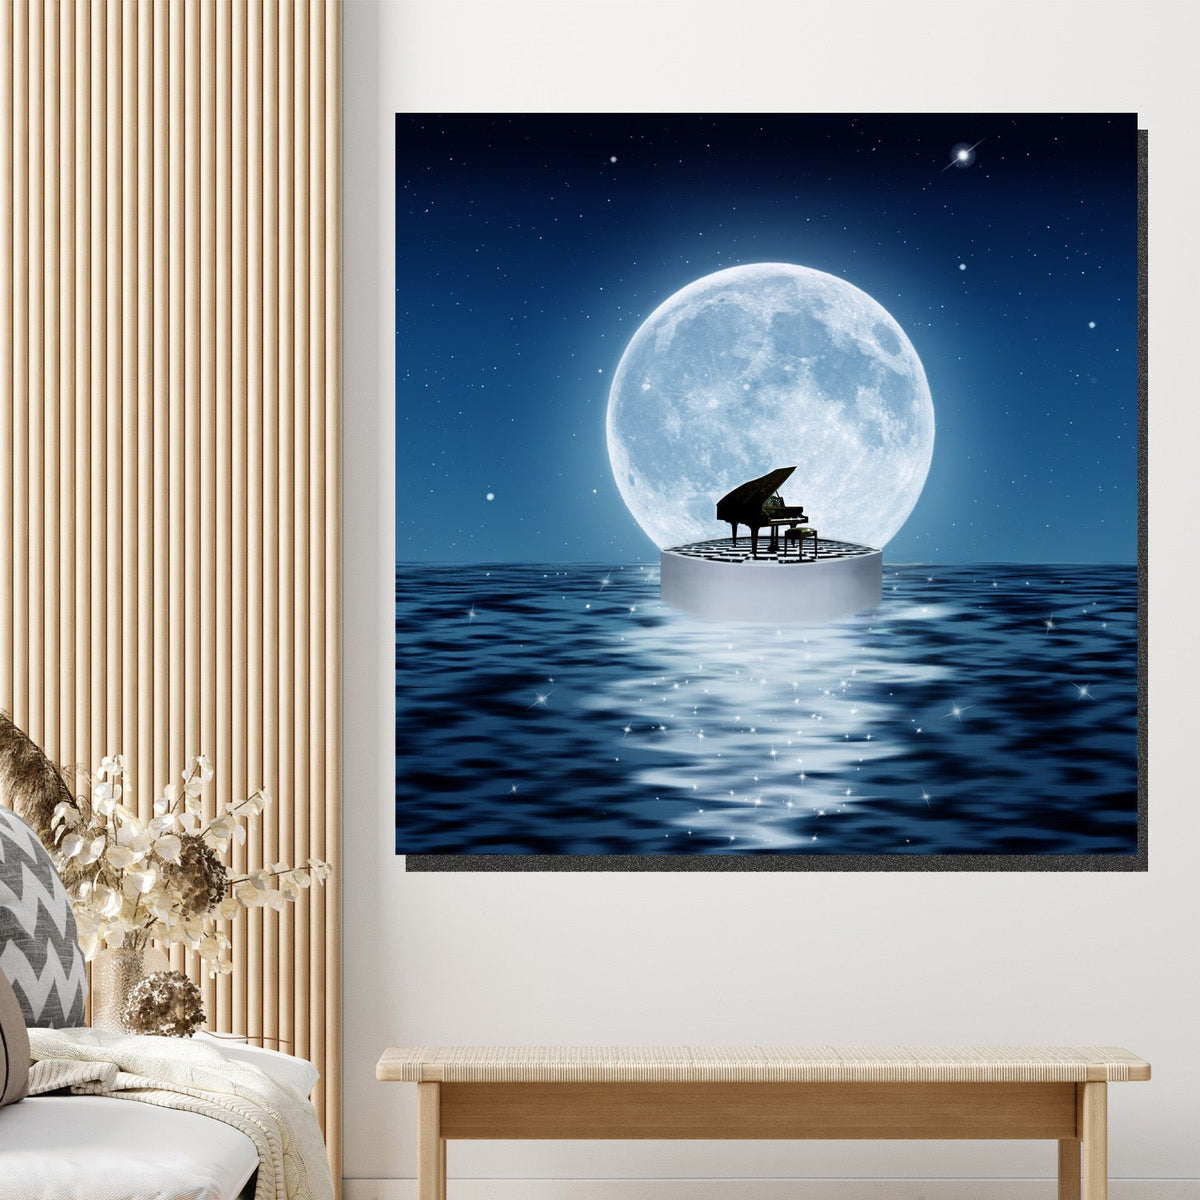 https://cdn.shopify.com/s/files/1/0387/9986/8044/products/PianoAndFullMoonCanvasArtprintStretched-1.jpg